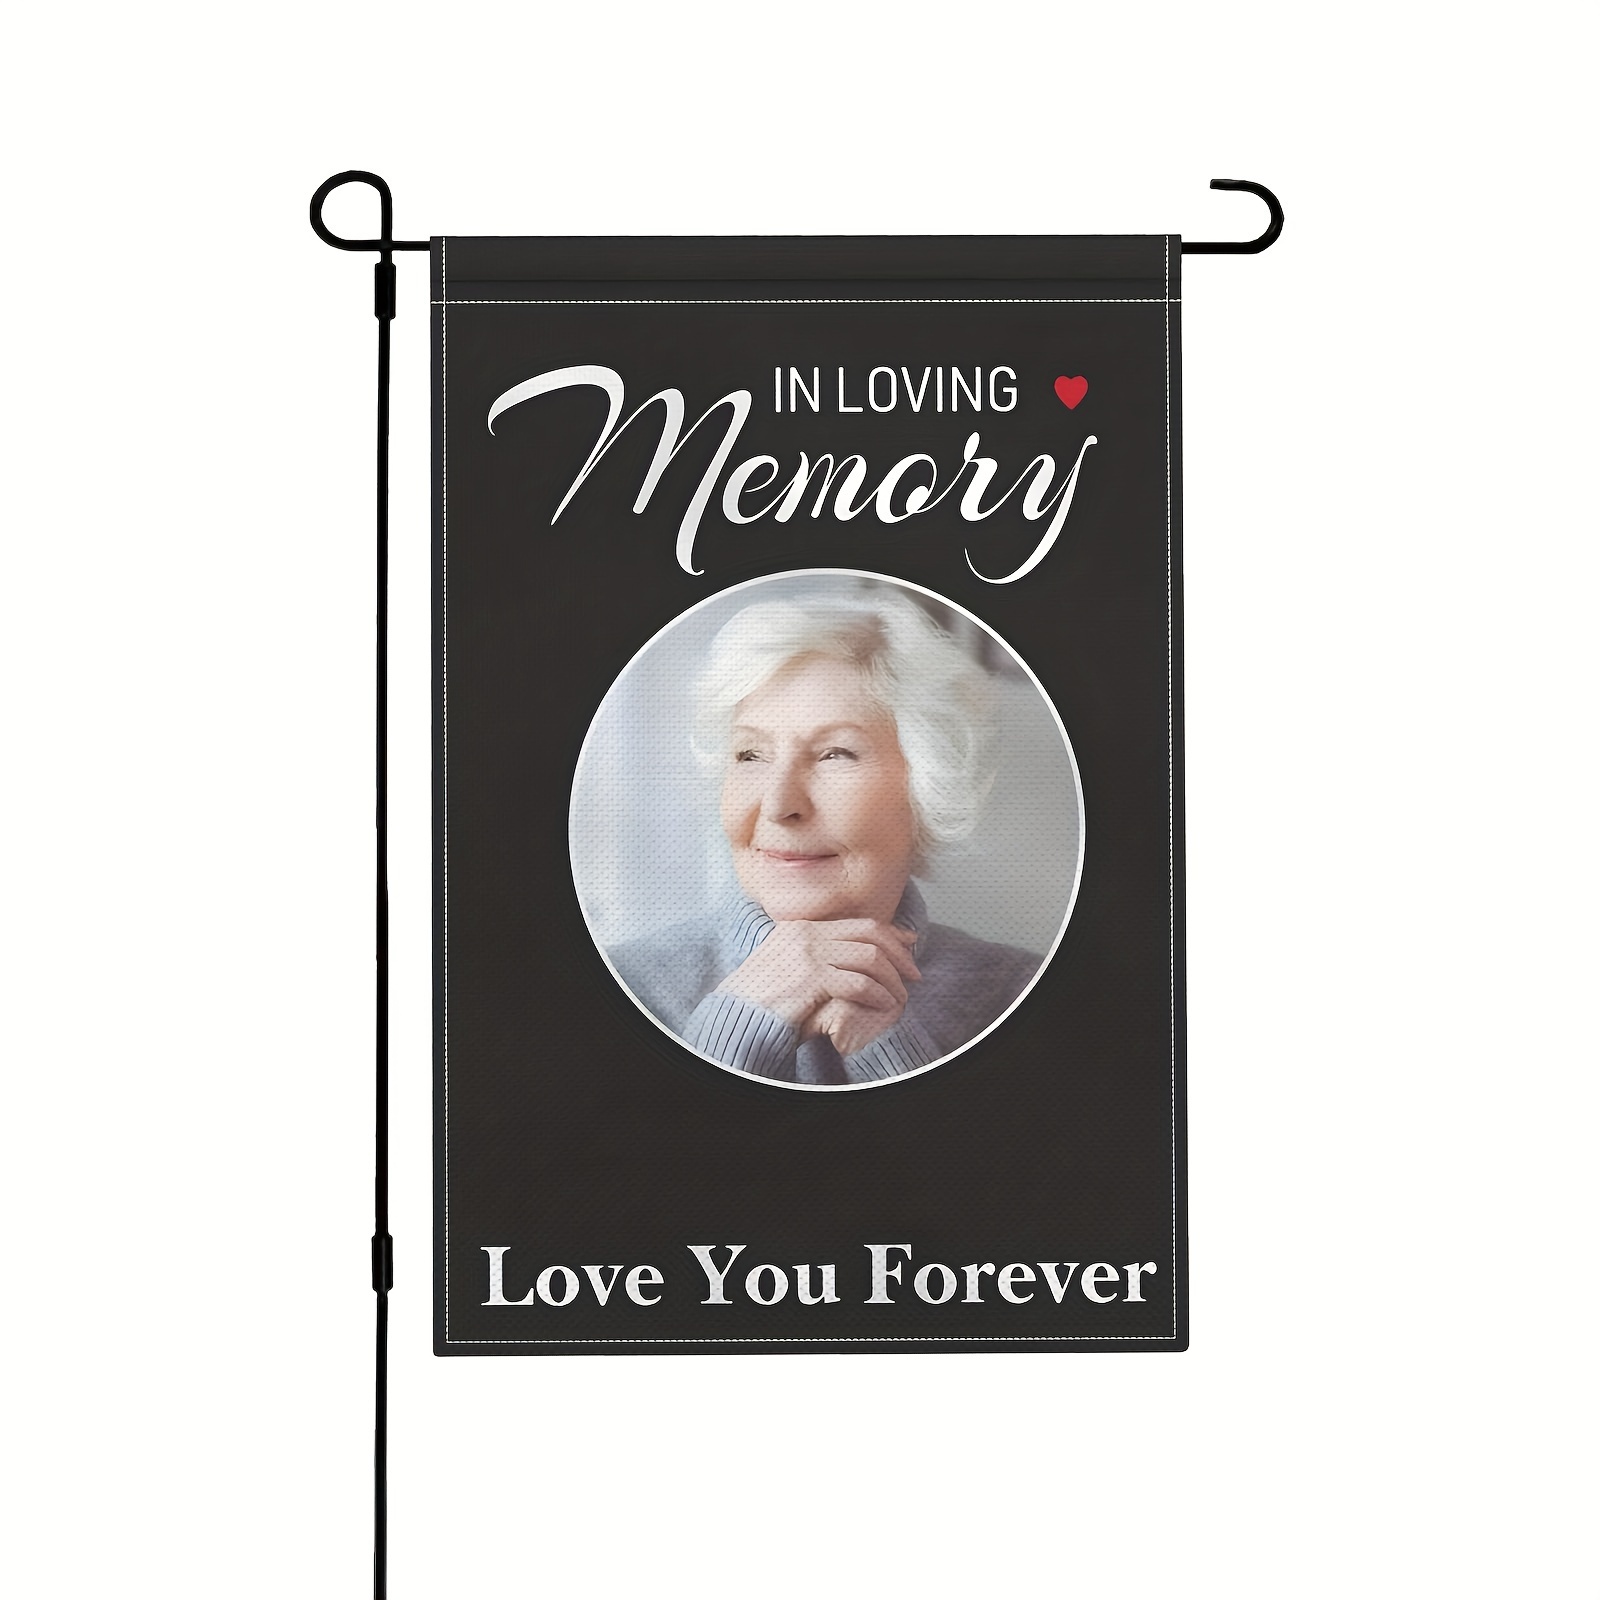 

1pc, Memorial Flag With Photo Memorial Garden Flags For Cemetery In Loving Memory Garden Flag Memorial Gifts For Loss Of Loved 1 Lawn Yard Flag, Mother Days Flag 12x18 Inch Double Sided(no Flagpole)